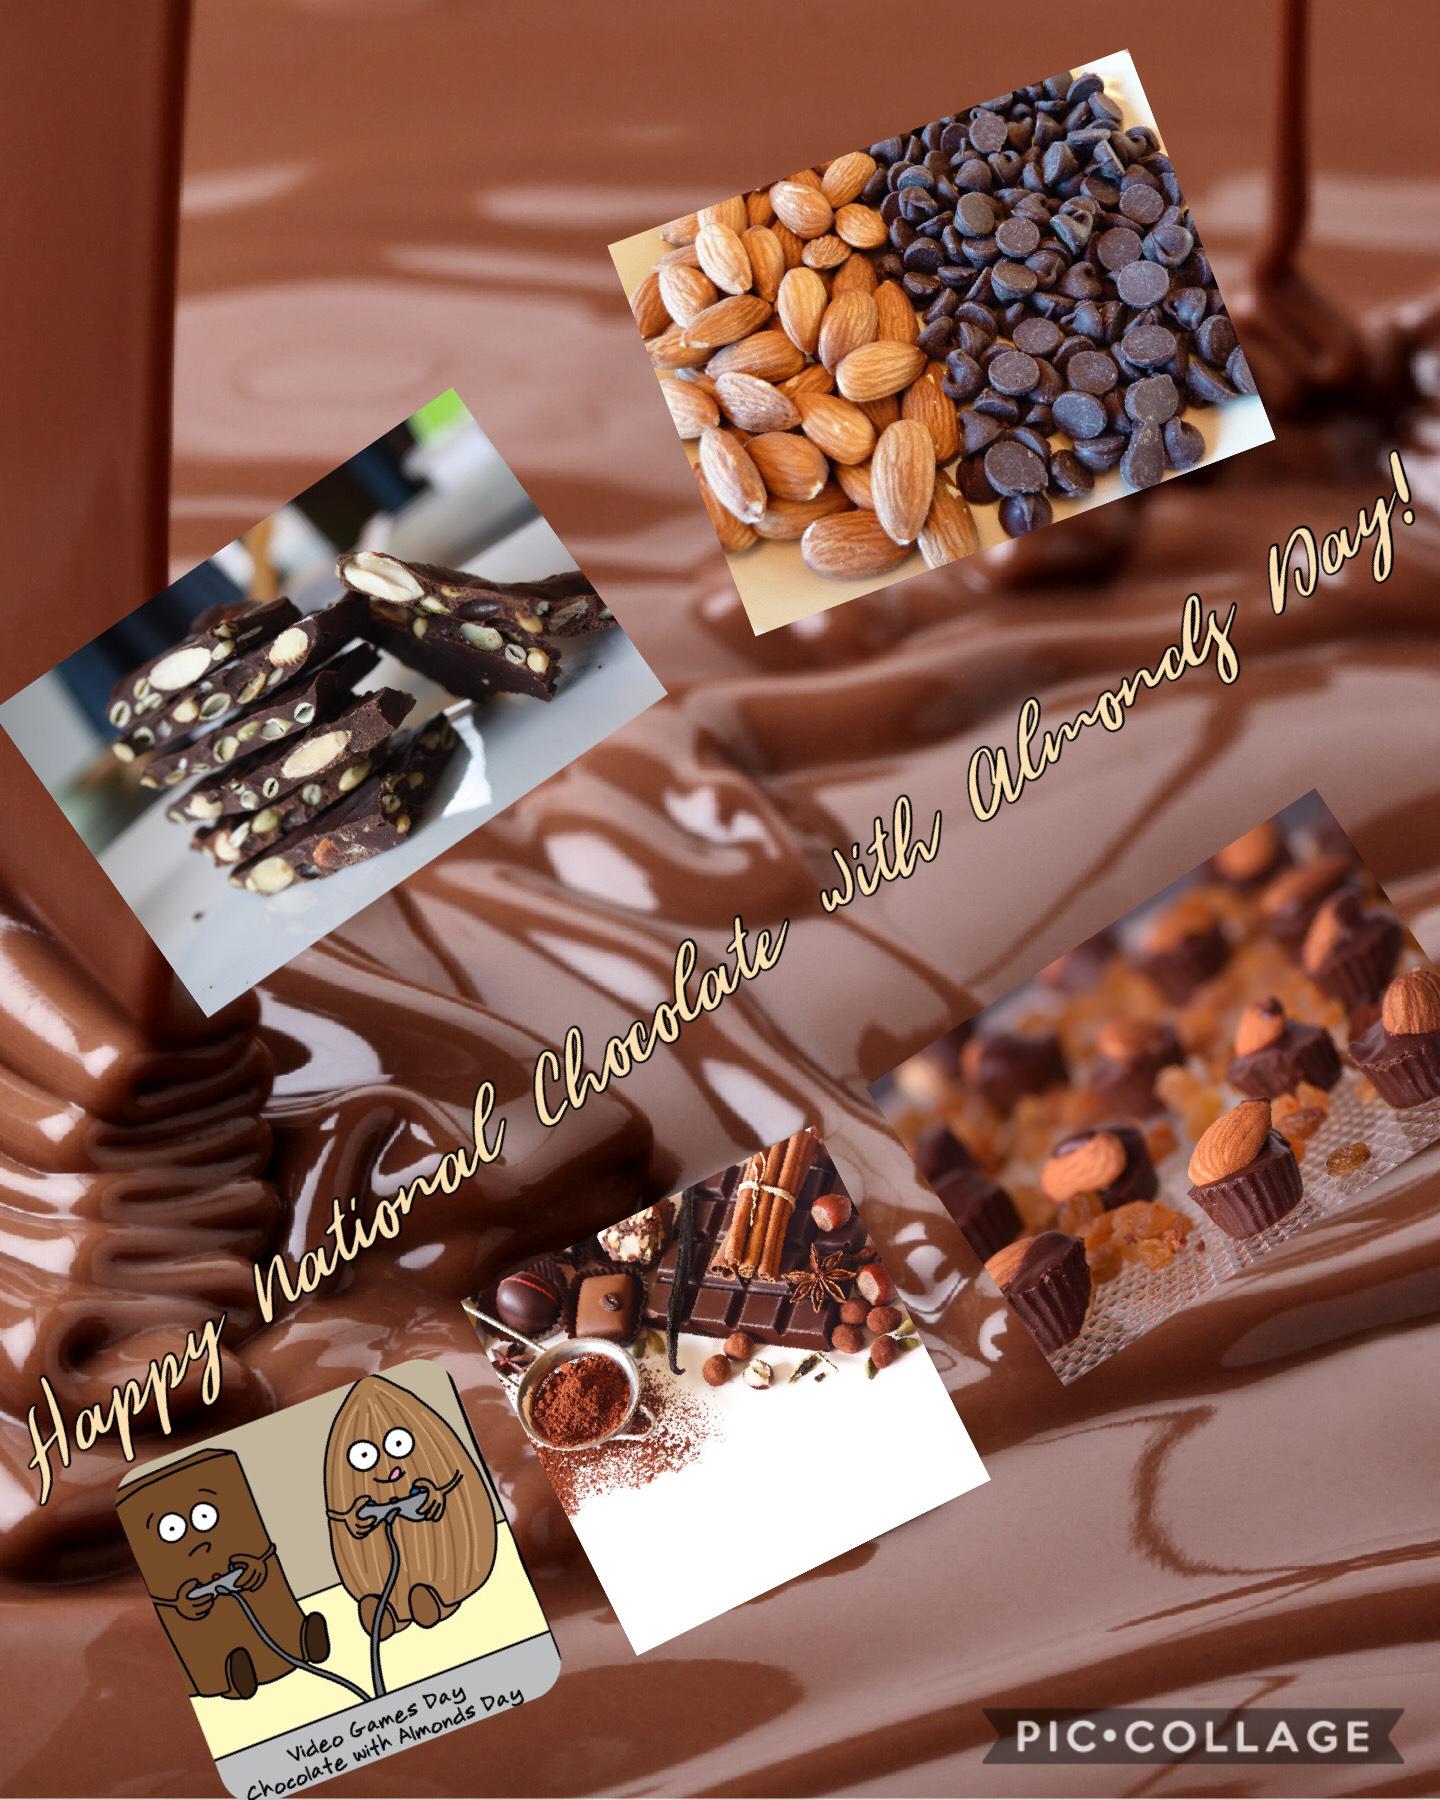 Happy national almond and chocolate day!